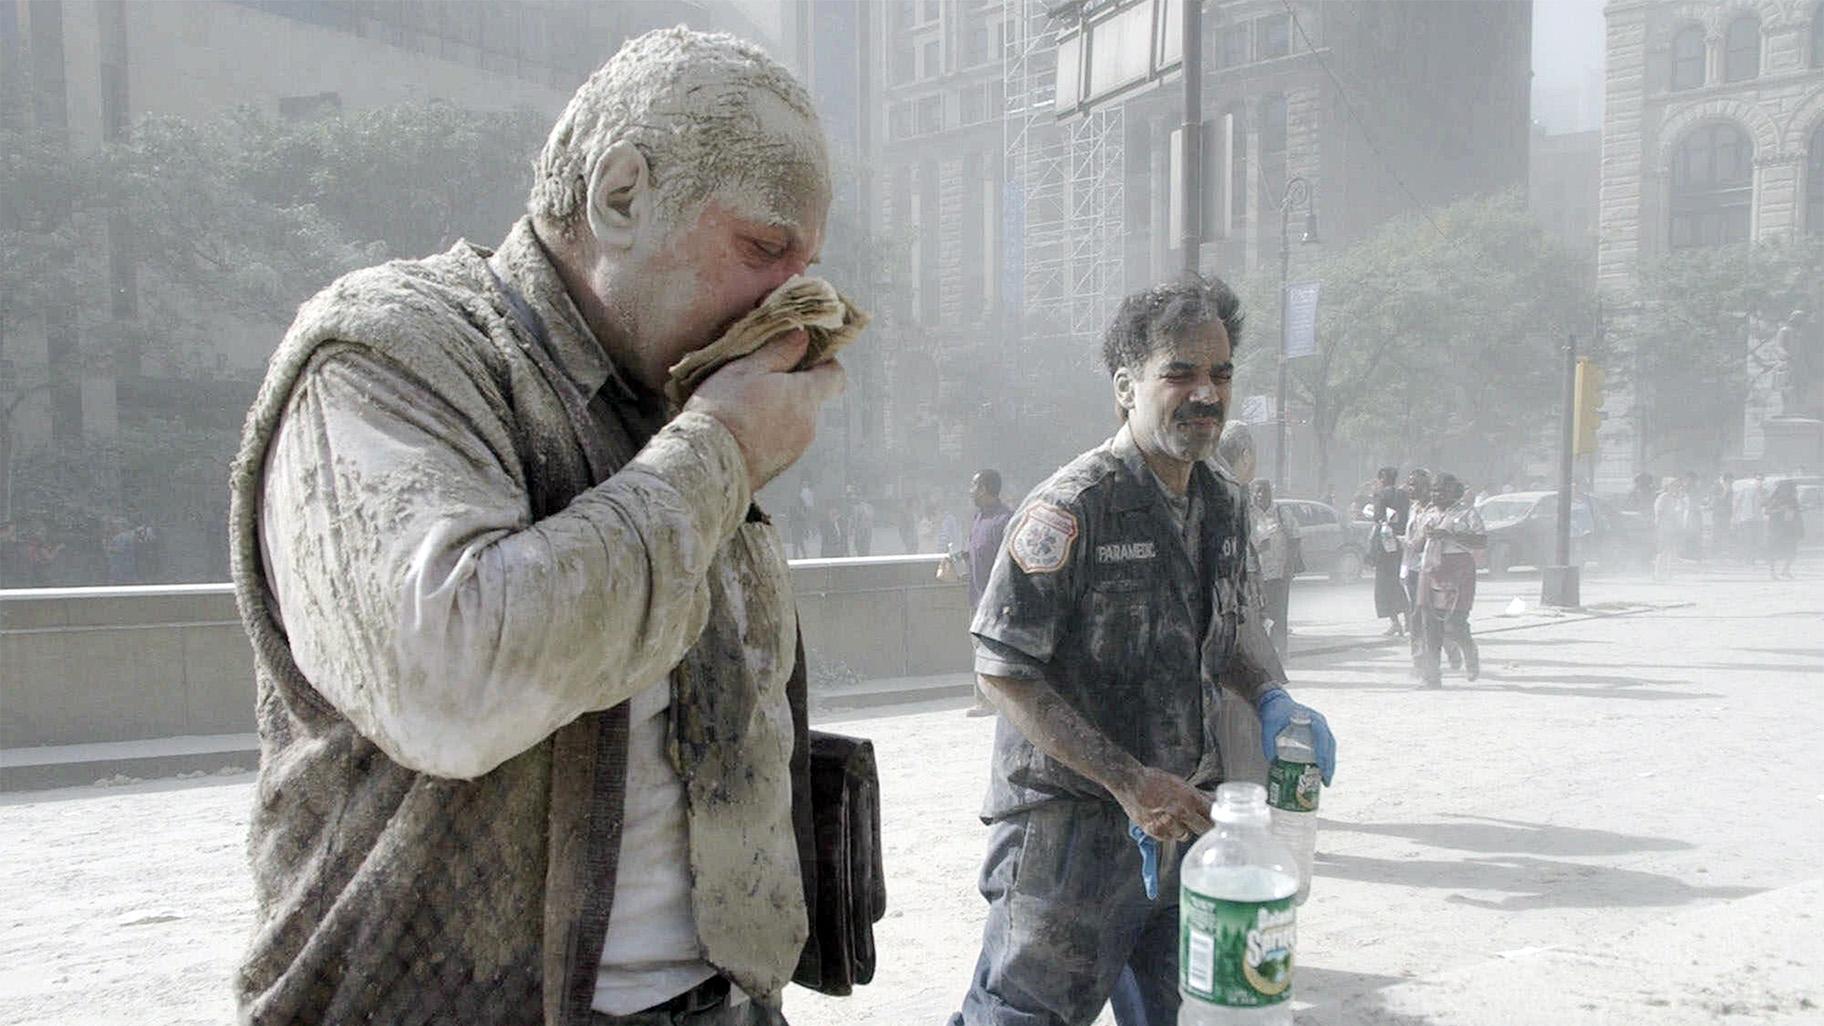 In this Sept. 11, 2001 file photo, a man coated with dust and debris from the collapse of the World Trade Center south tower coughs near City Hall, in New York.  (AP Photo / Amy Sancetta, File)